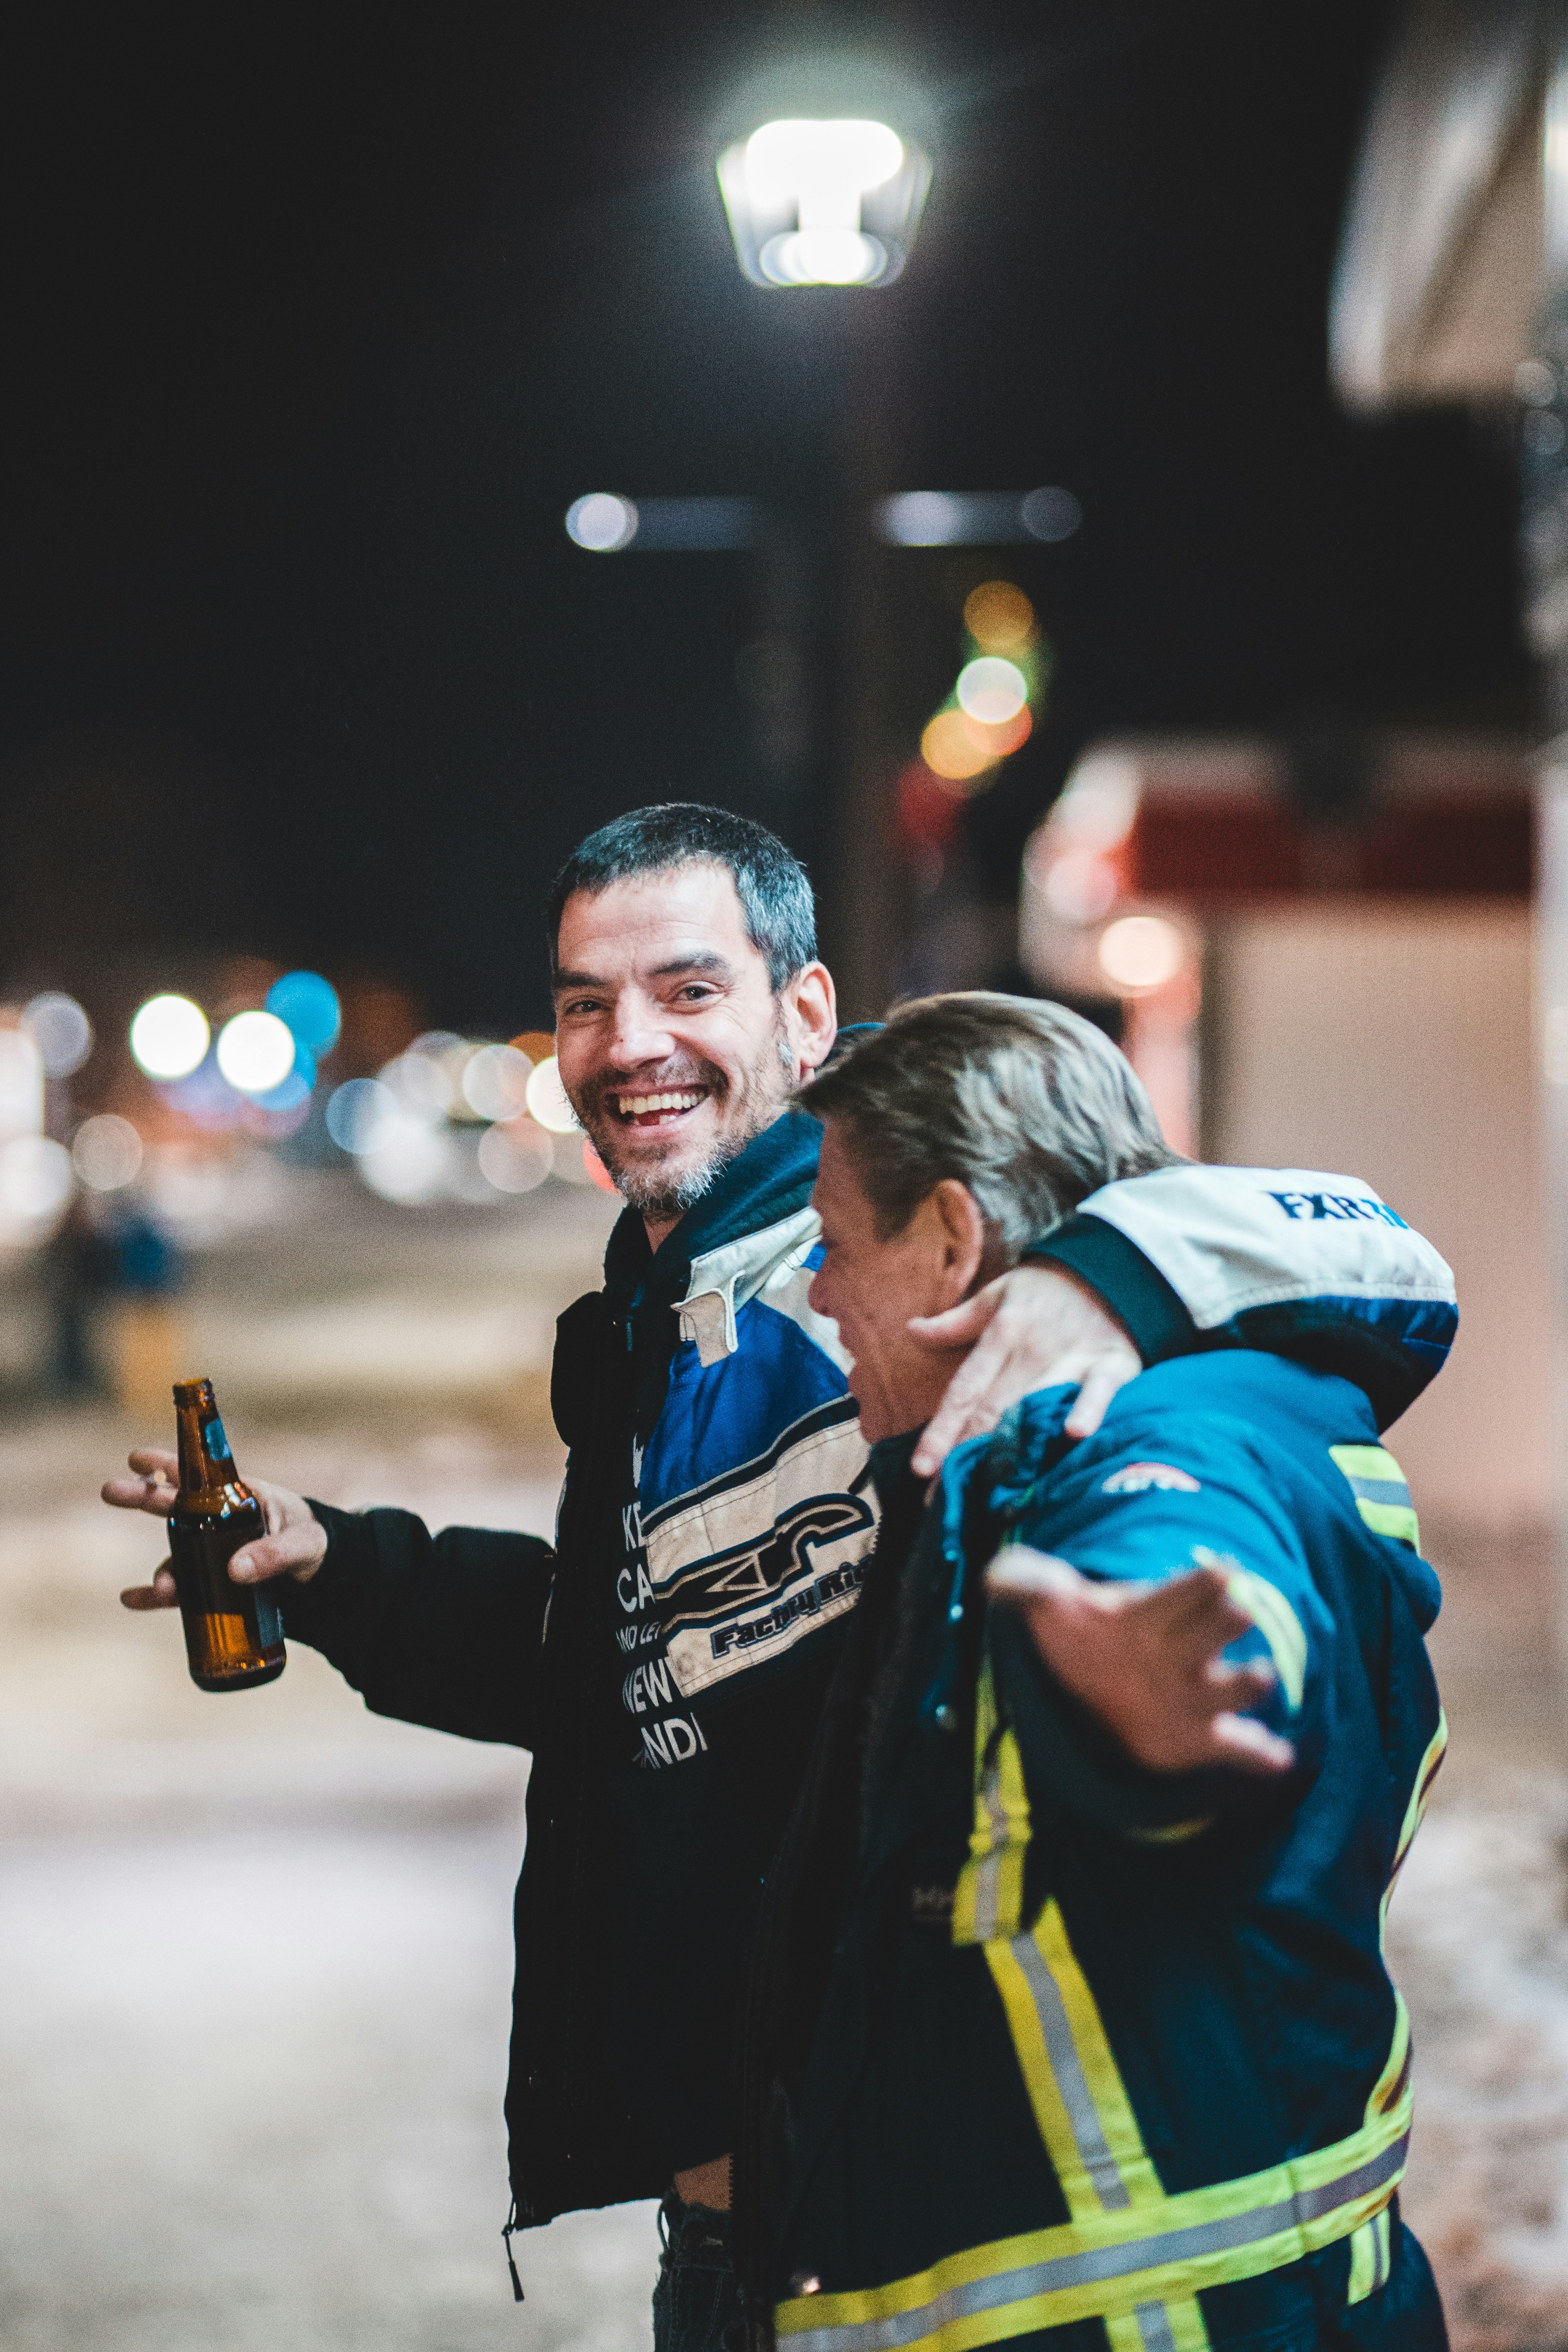 two smiling men holding holding beer bottle at night